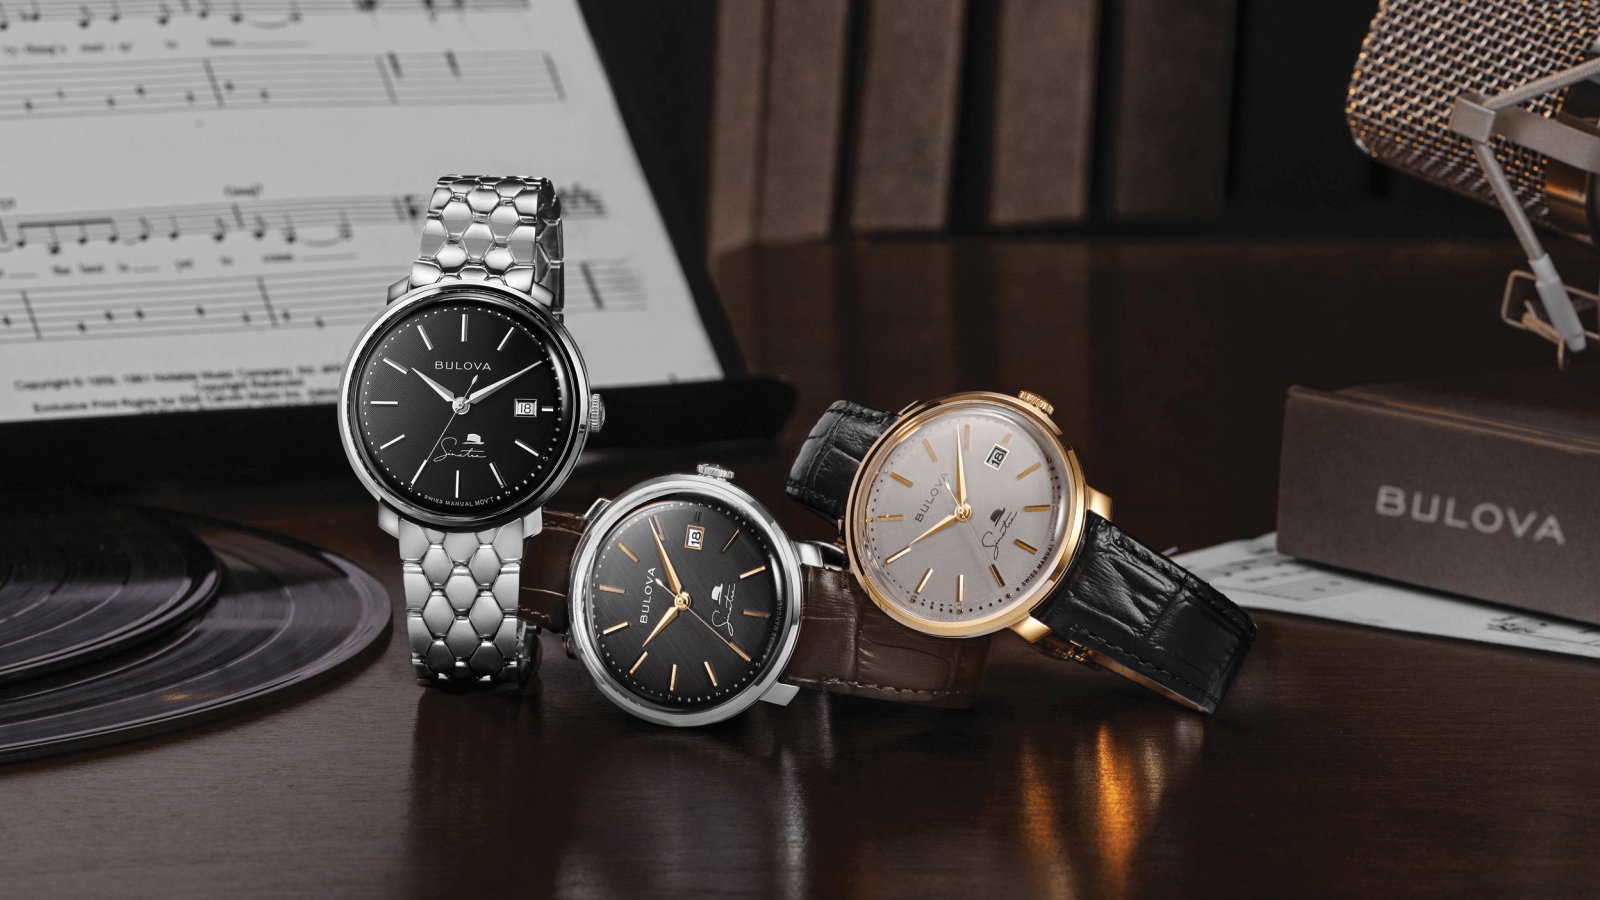 BST Bulova Frank Sinatra: Dòng đồng hồ Best Is Yet To Come